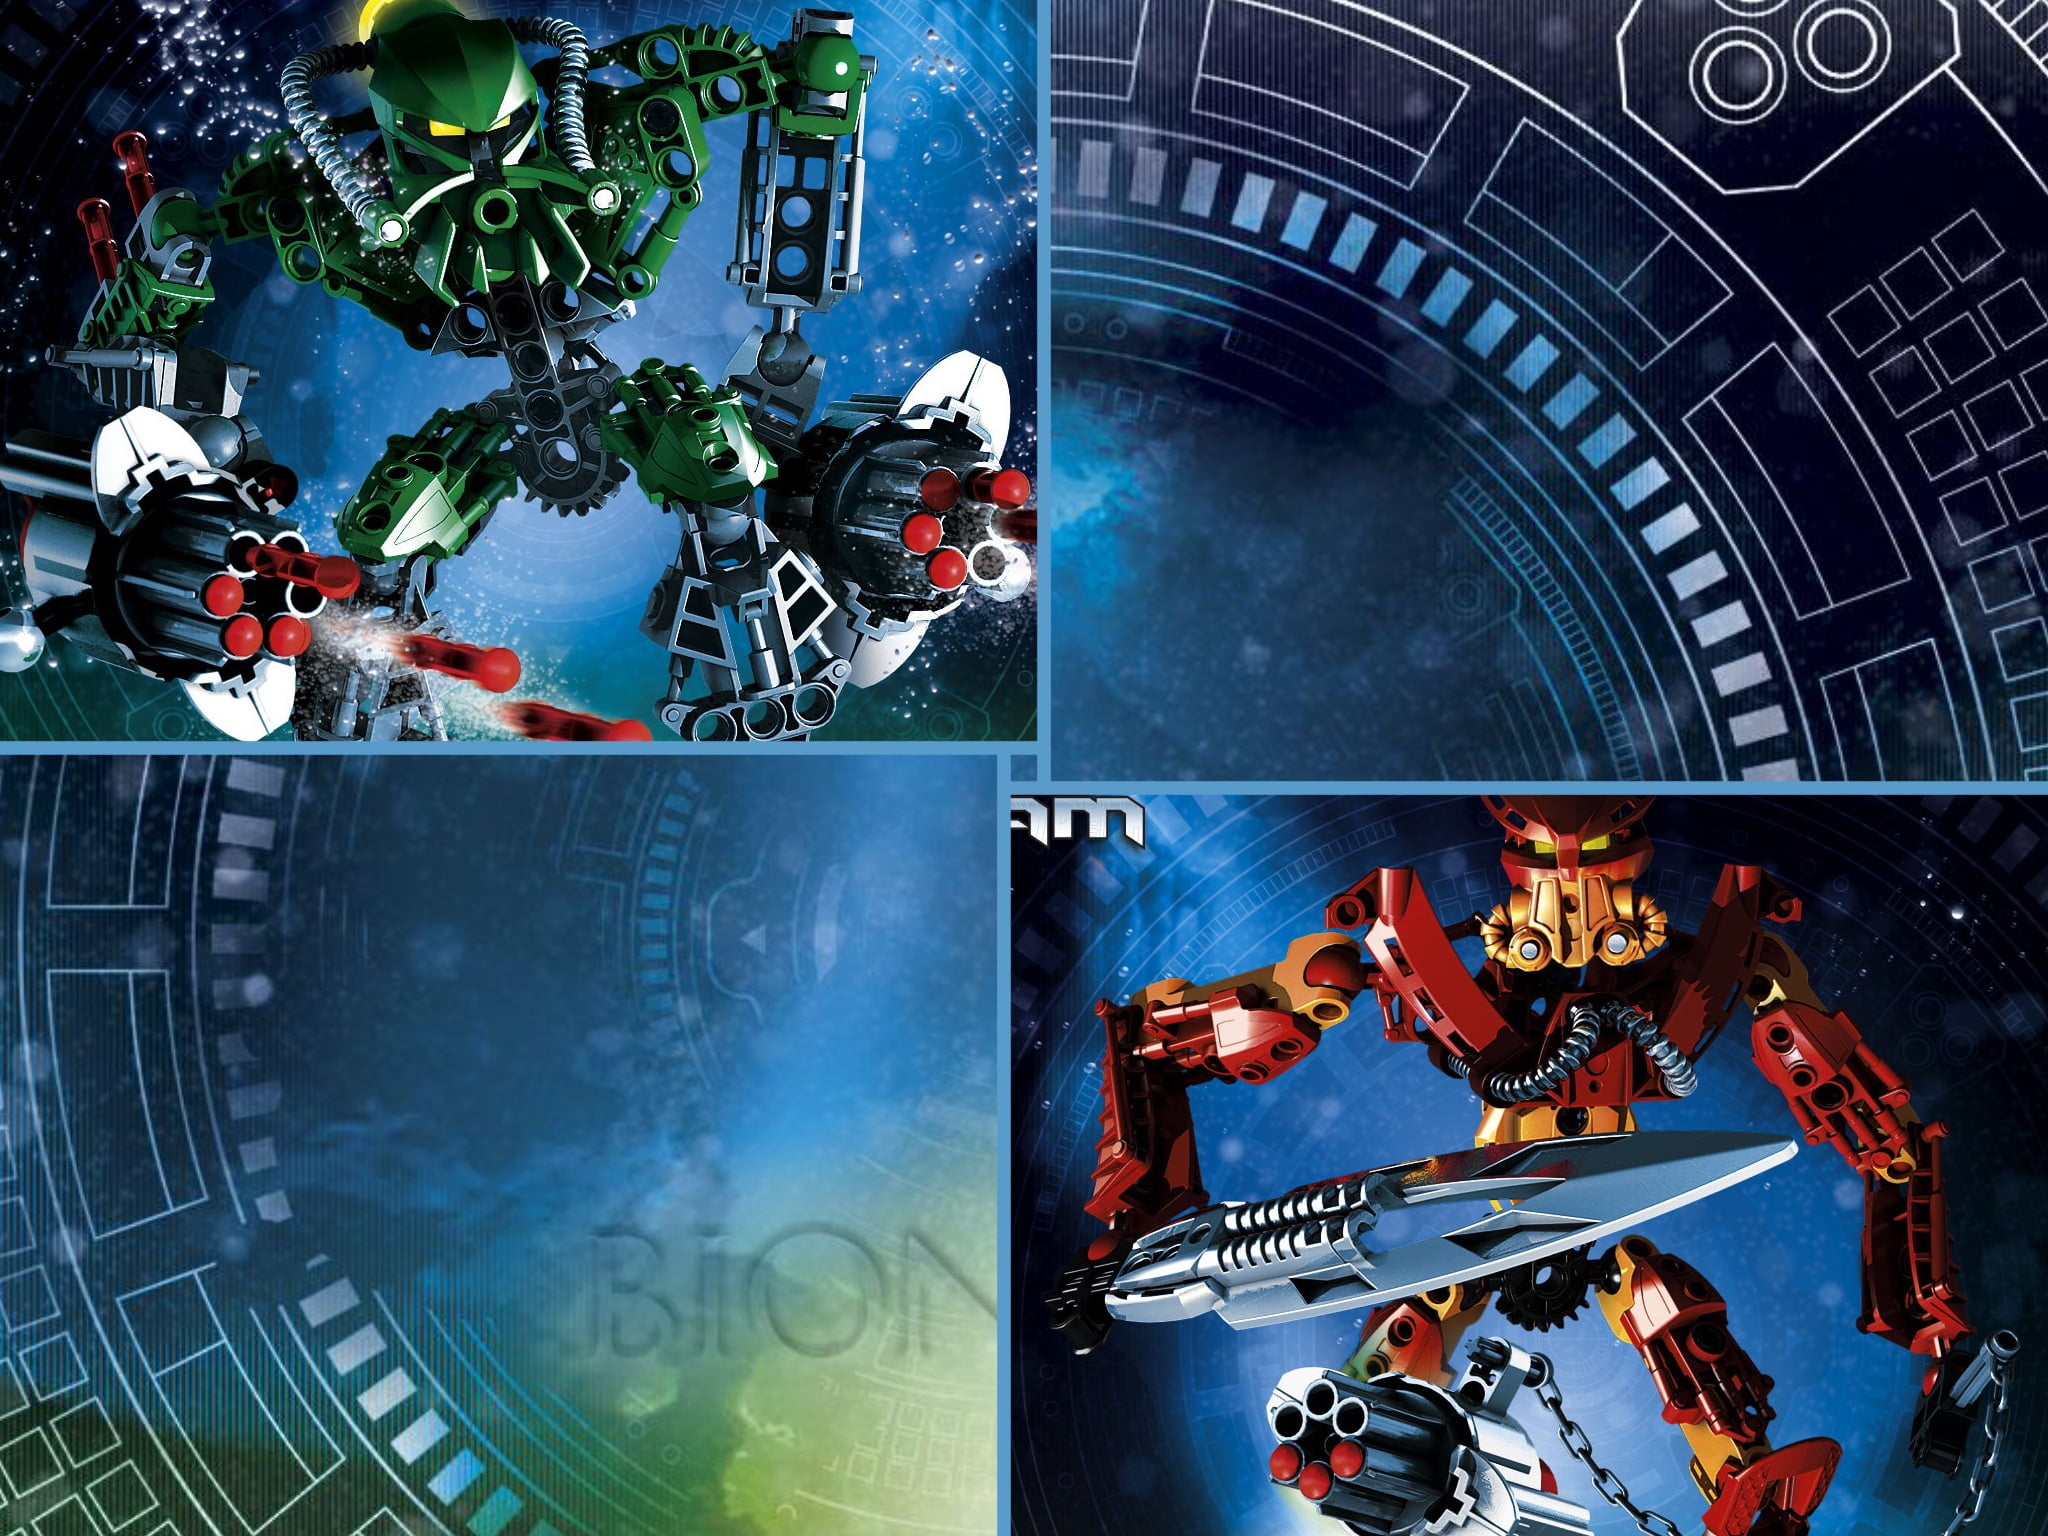 Bionicle, Toa, collage, blue